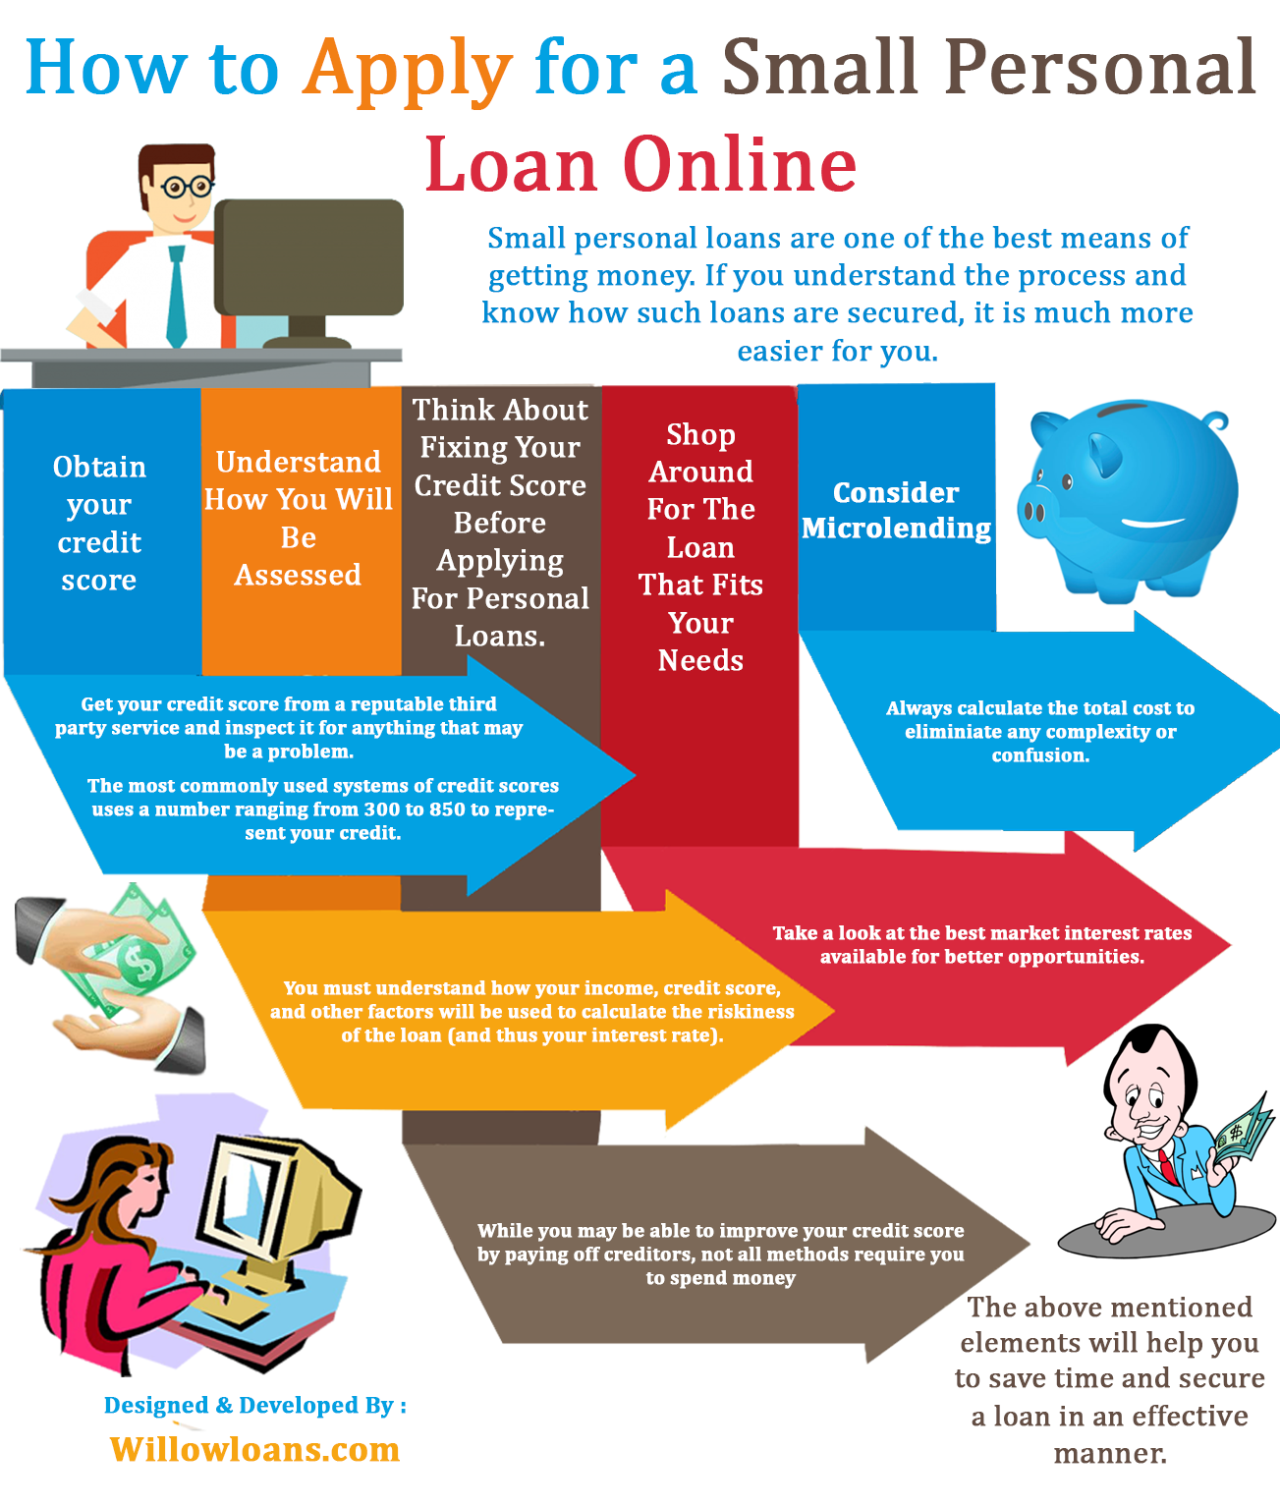 How to Apply for a Small Personal Loan Online